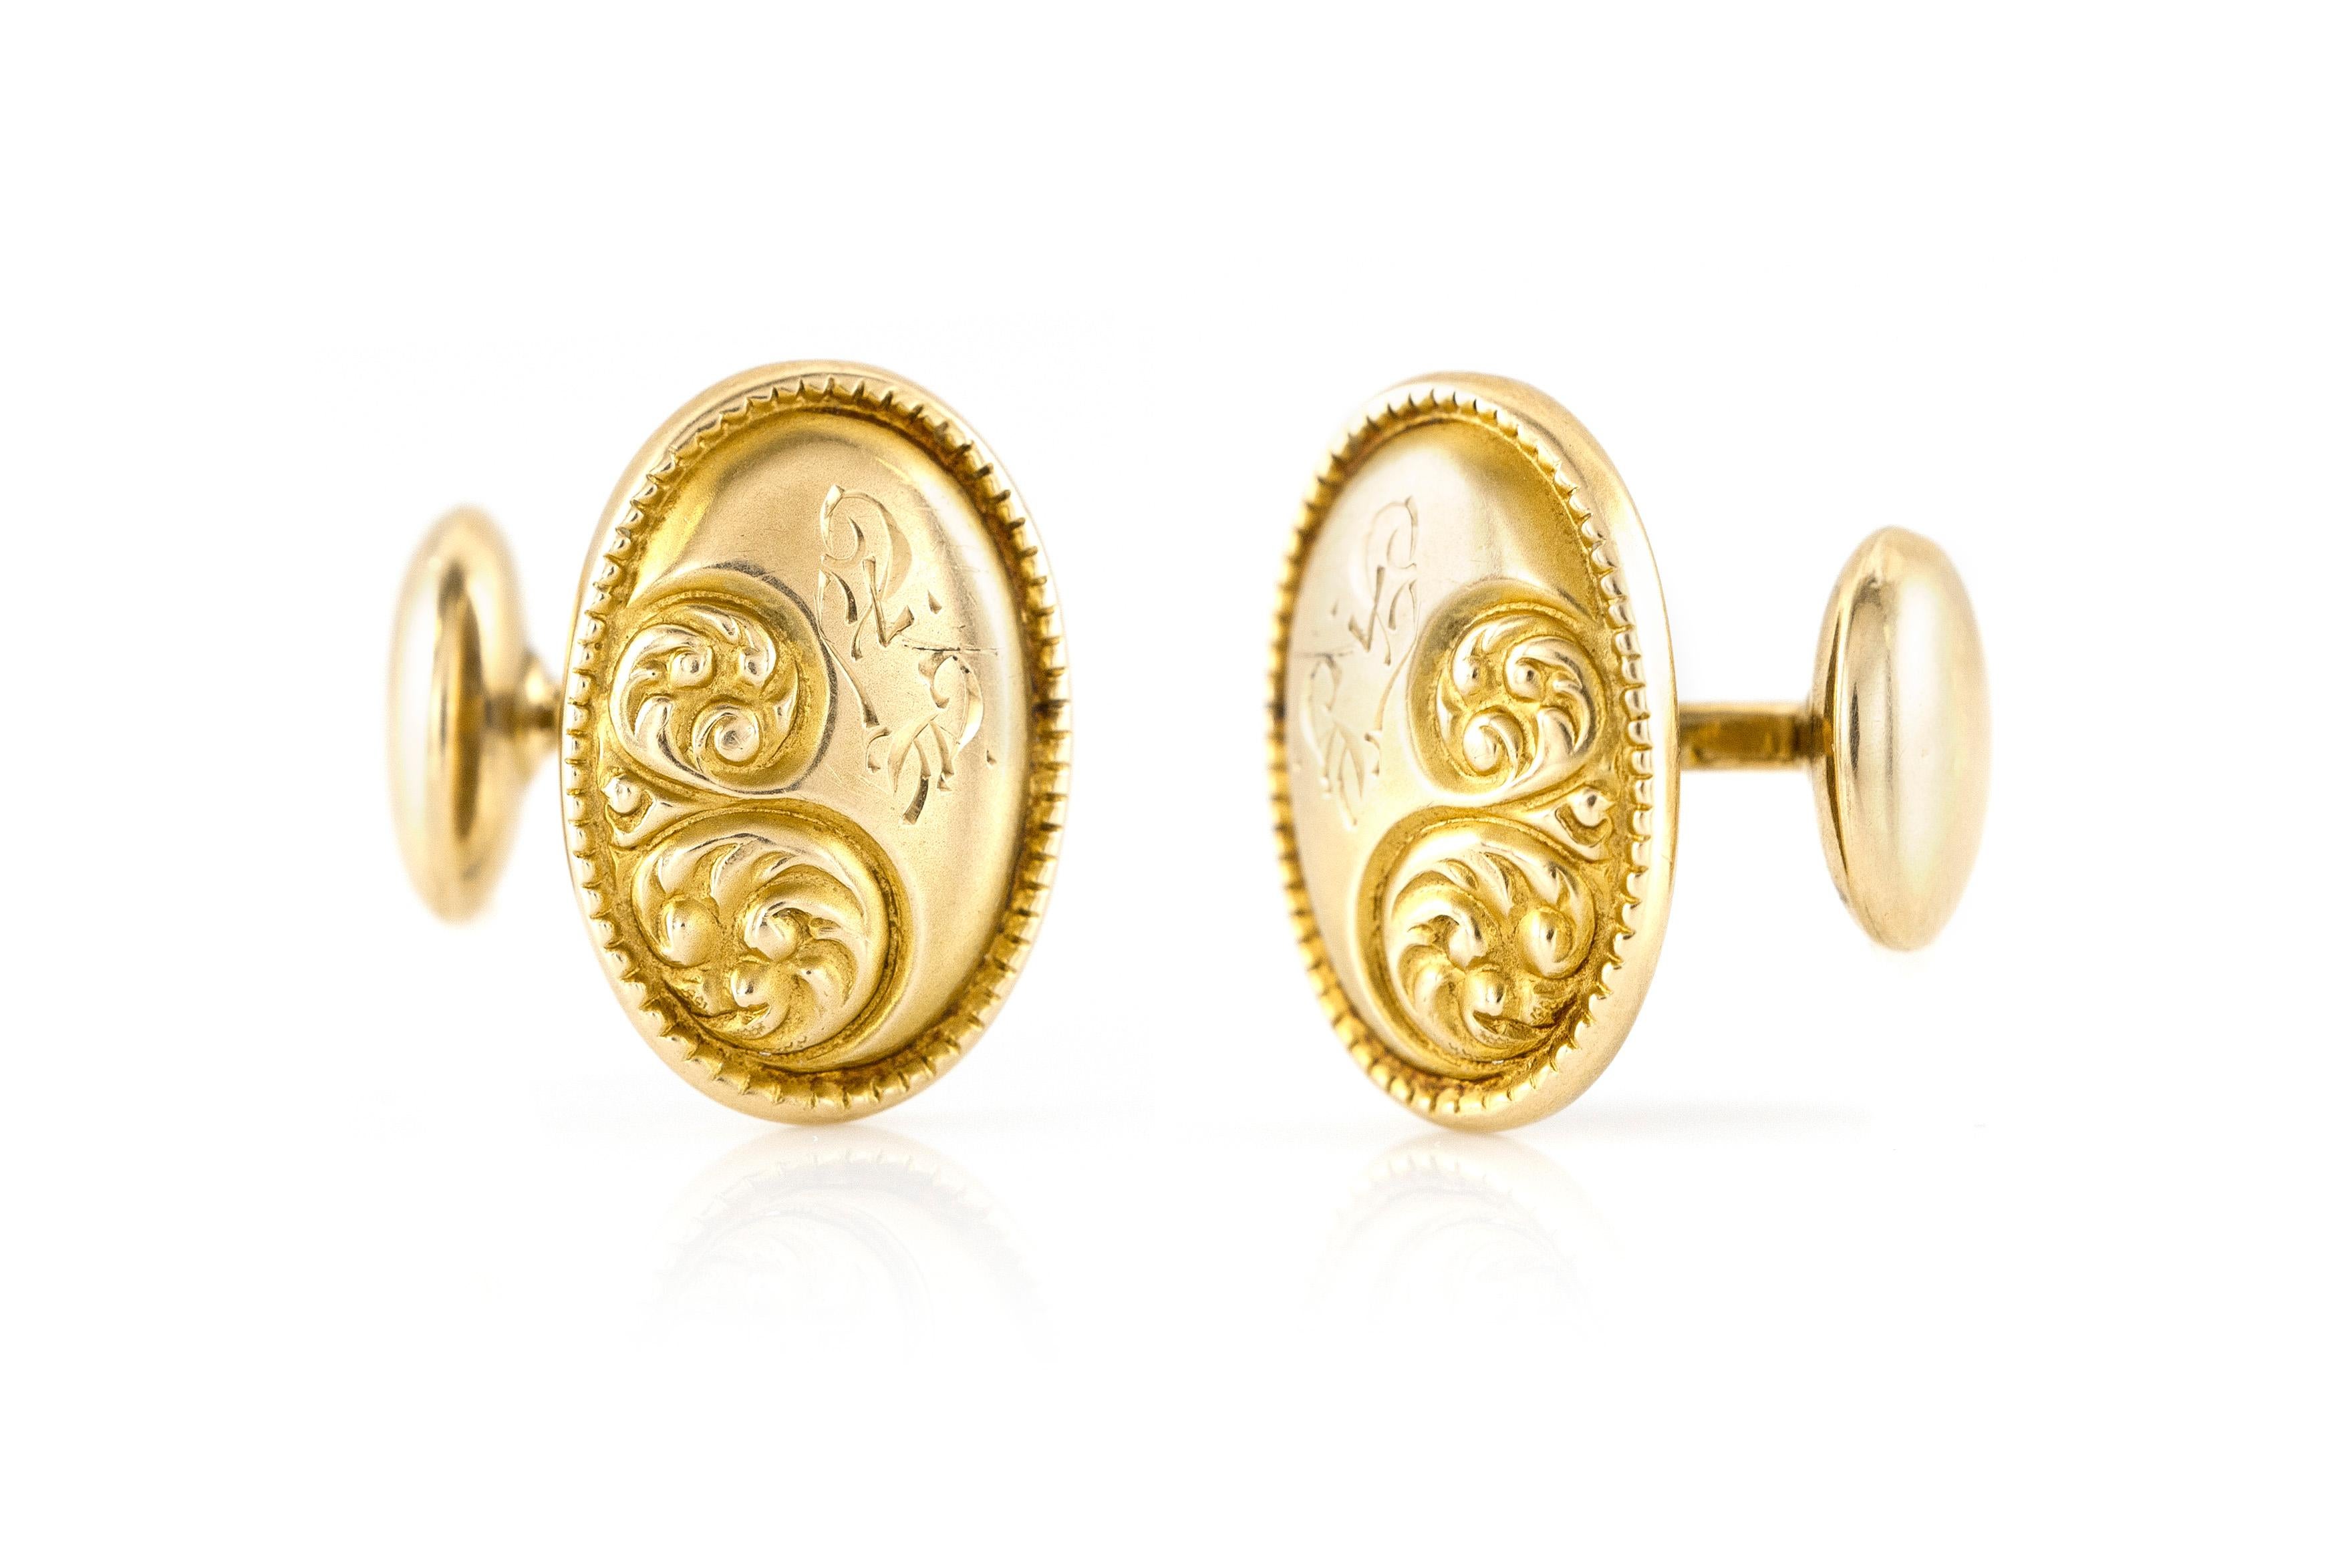 Oval Gold Floral Motif Cufflinks In Excellent Condition For Sale In New York, NY